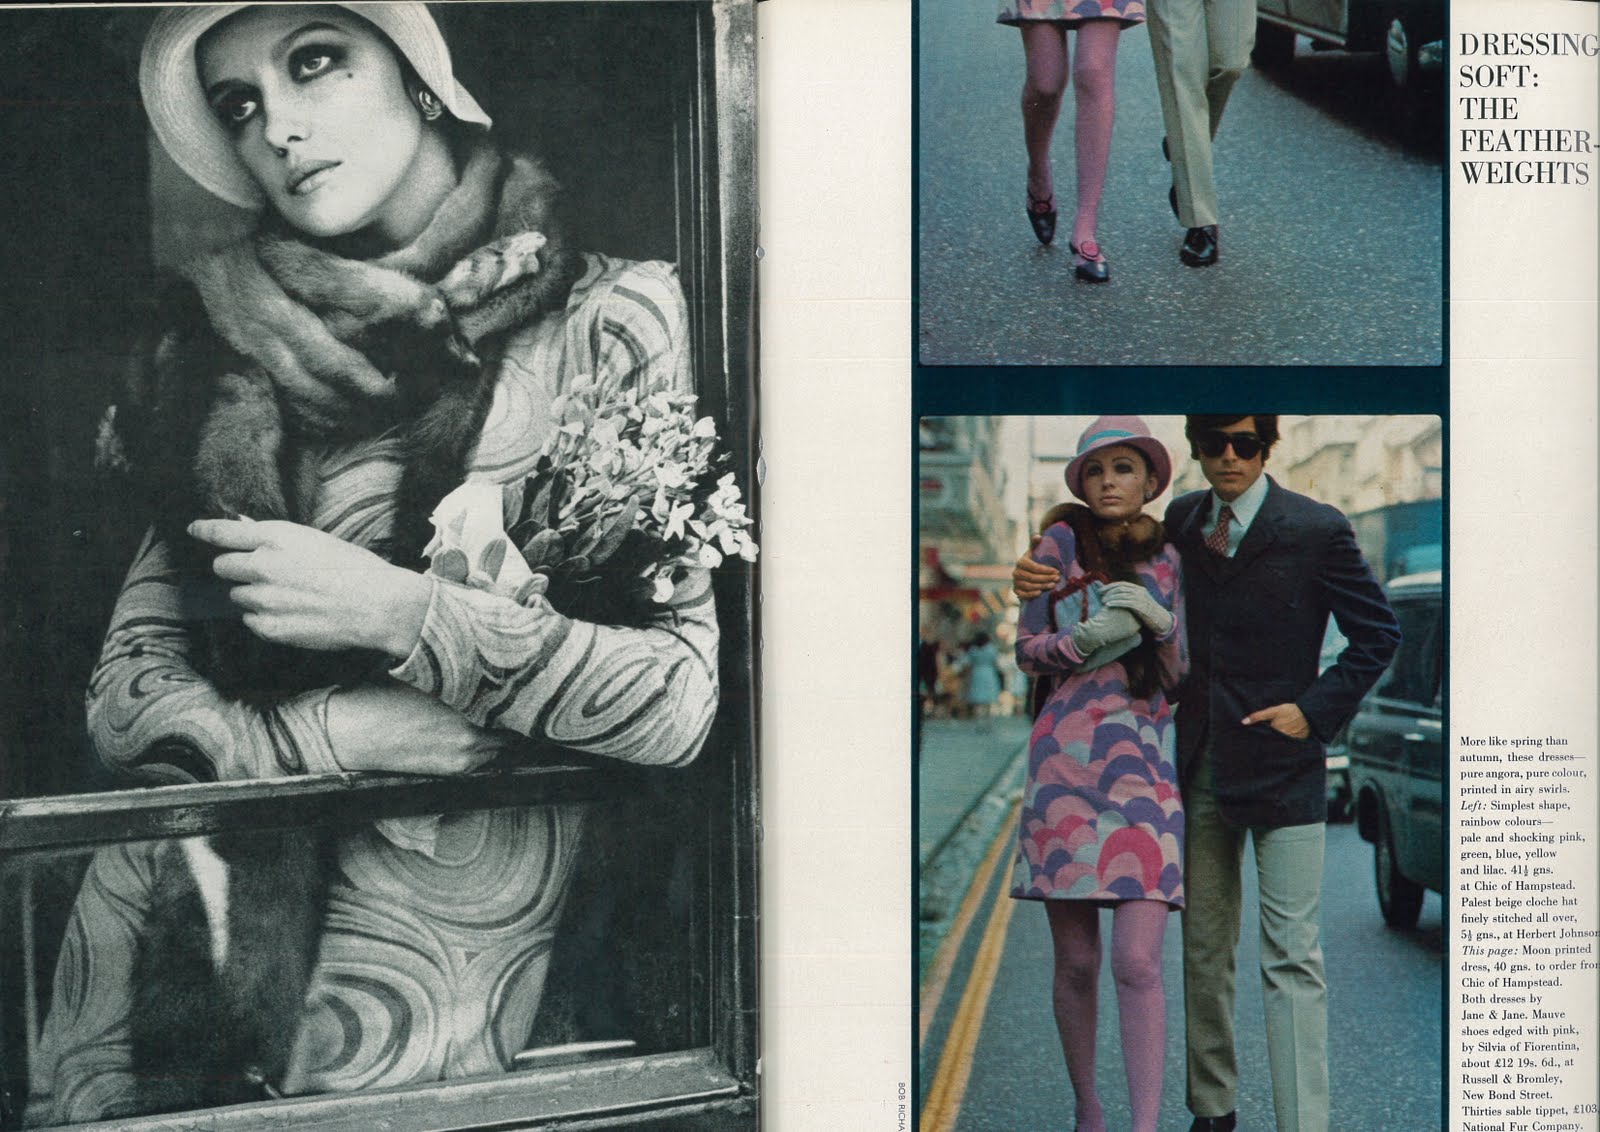 youthquakers: 15th September 1966 - UK Vogue